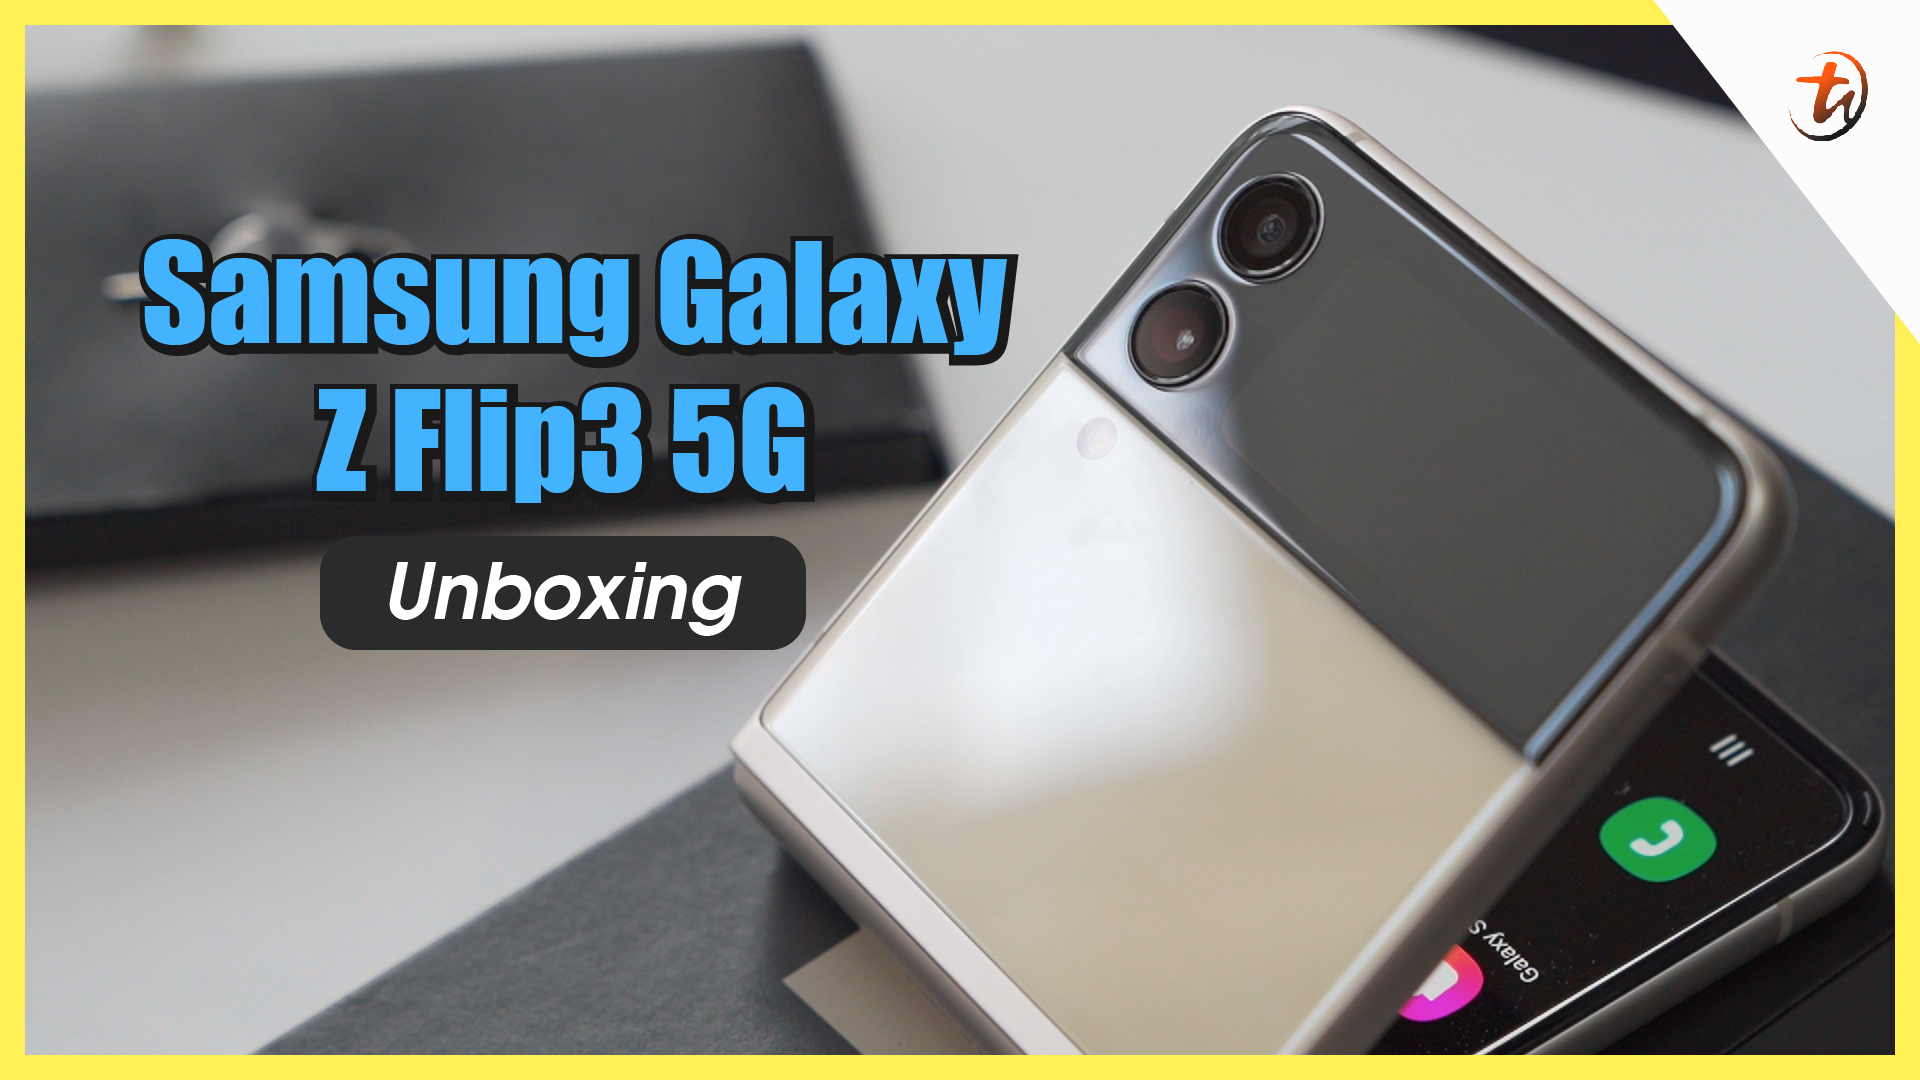 Samsung Galaxy Z Flip3 5G  - Selfie without any hustle | TechNave Unboxing and Hands-On Video